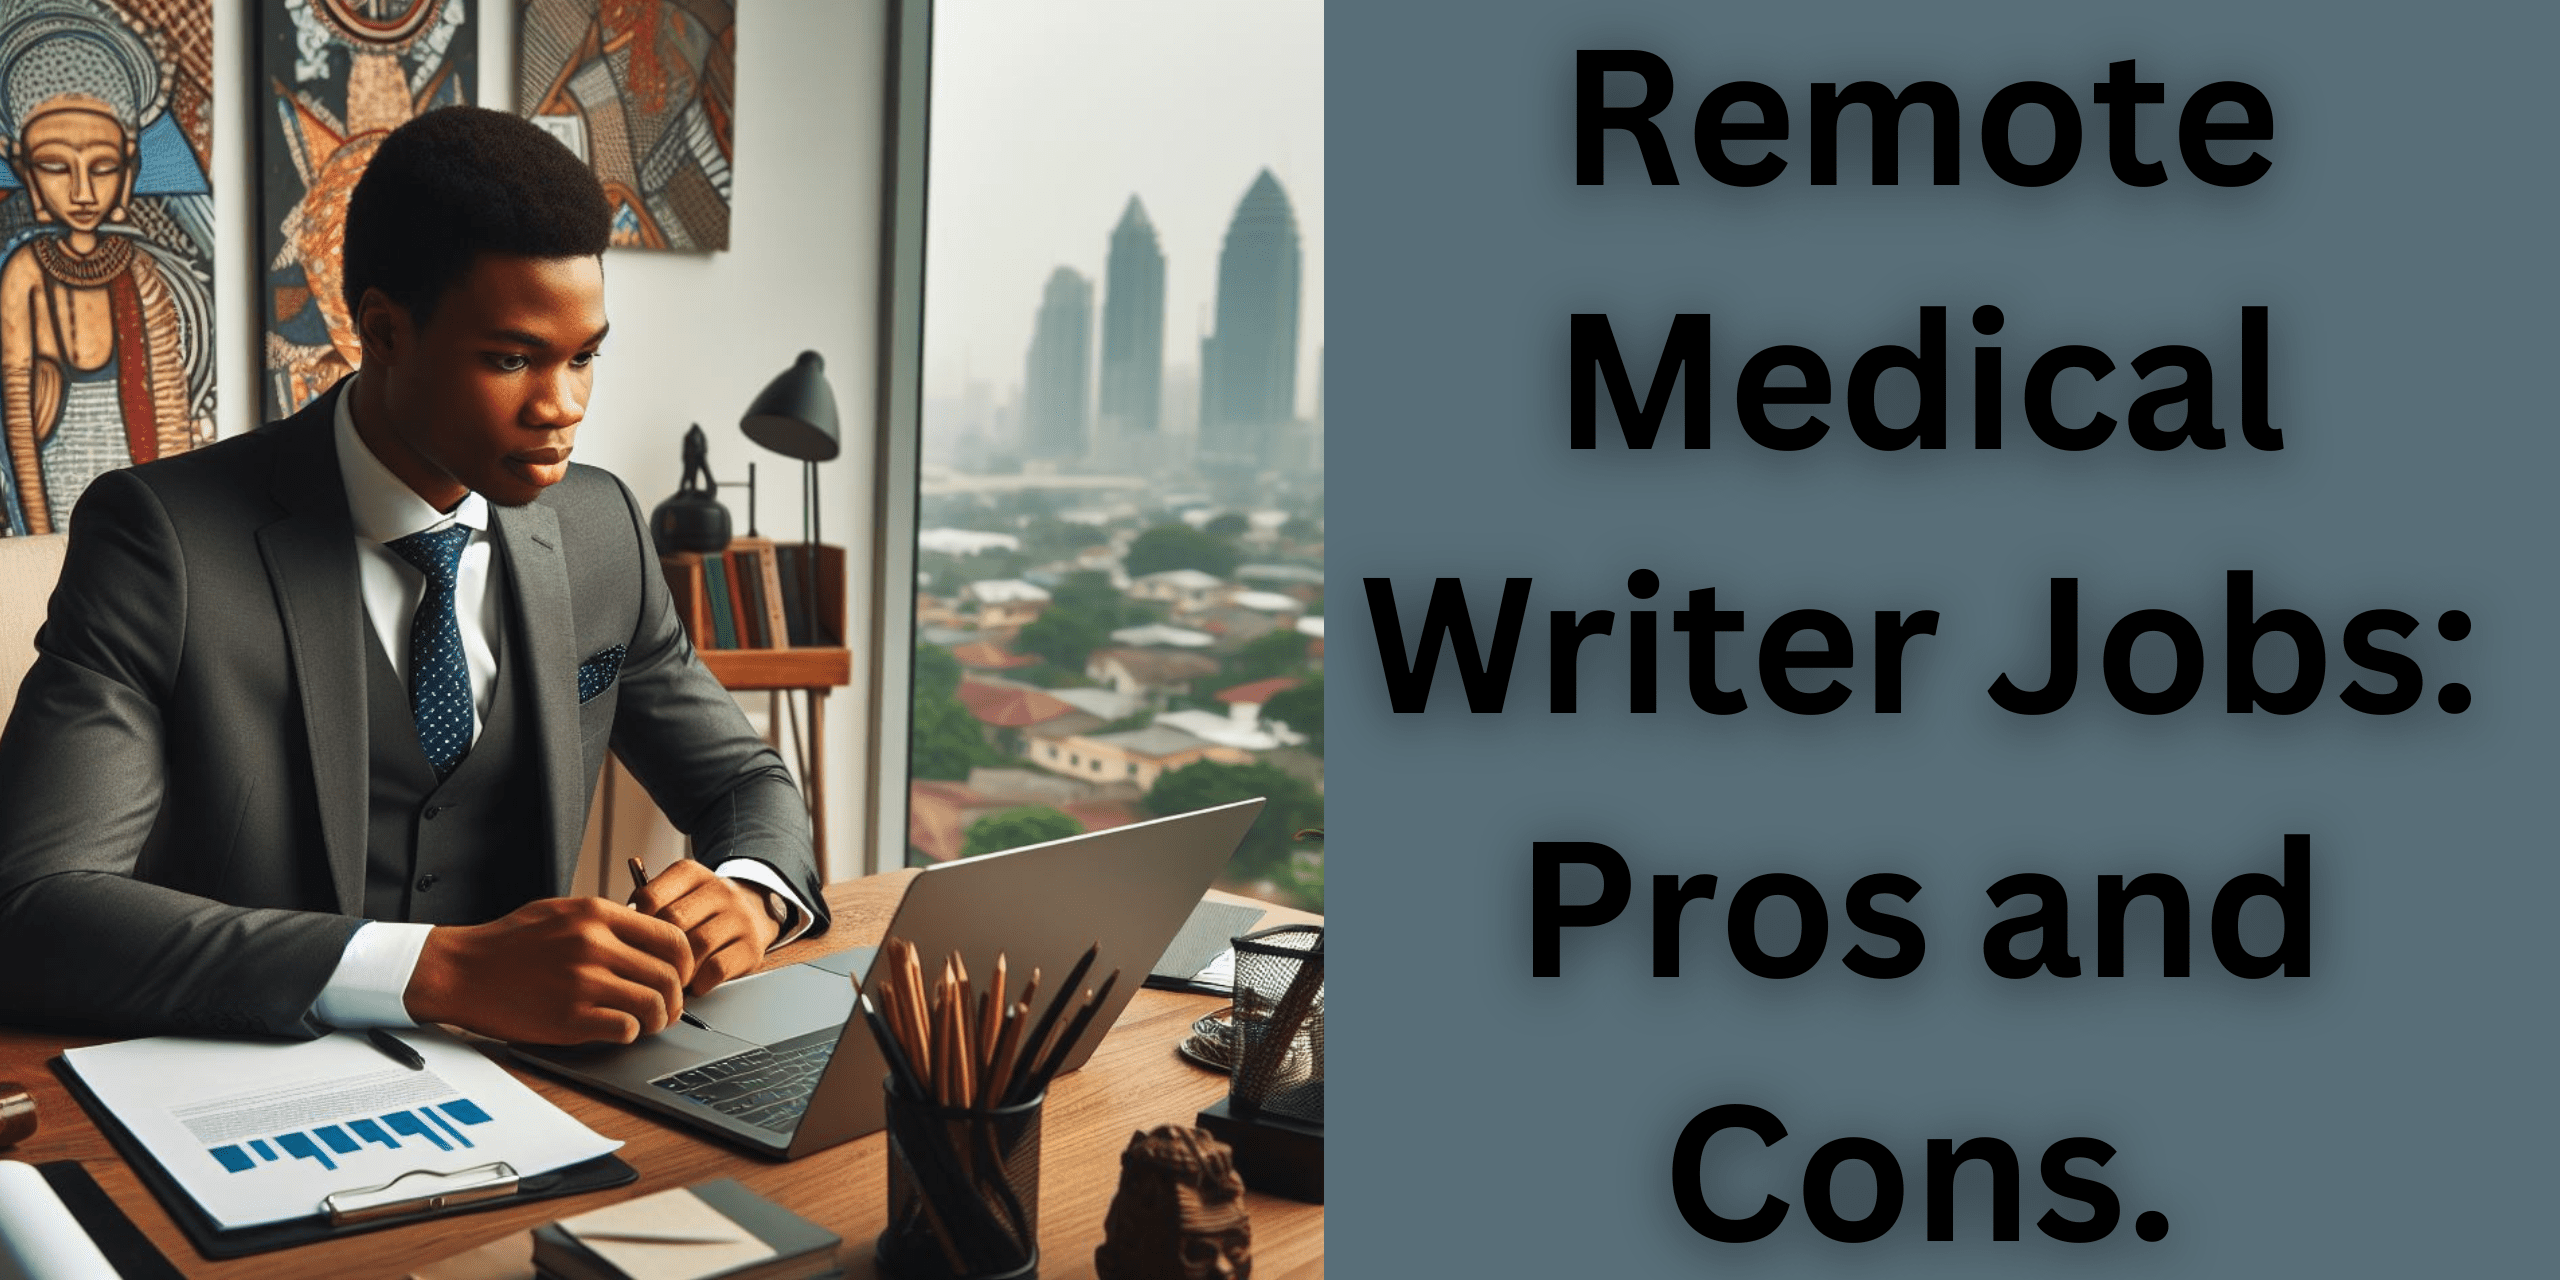 alt="Remote Medical Writer Jobs: Pros and Cons"